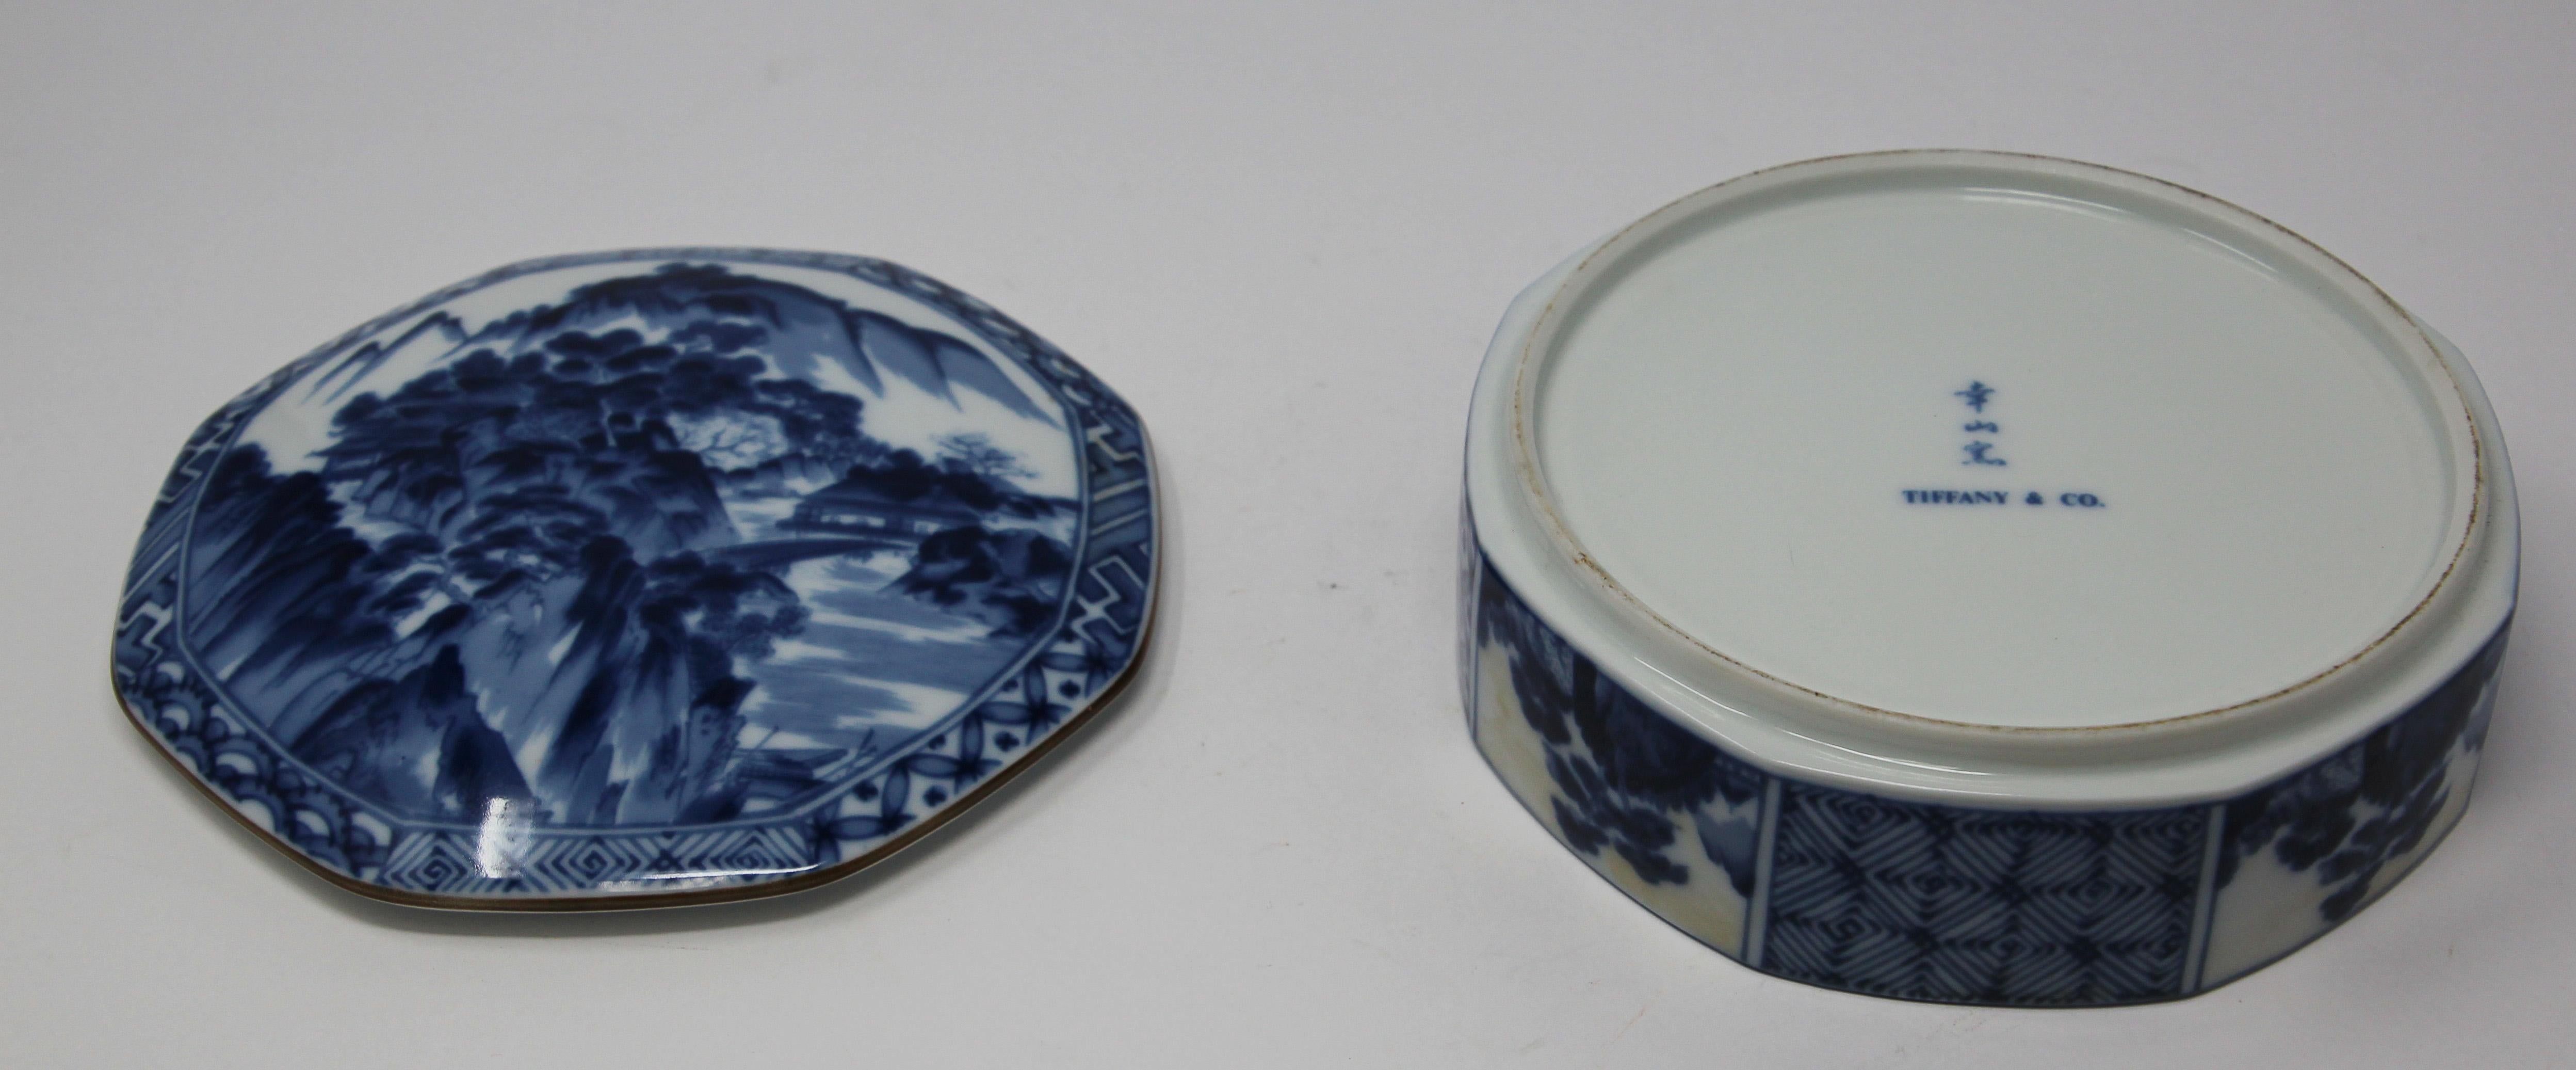 Tiffany & Co. Porcelain Lidded Trinket Box with a Chinese Blue and White Decor 1